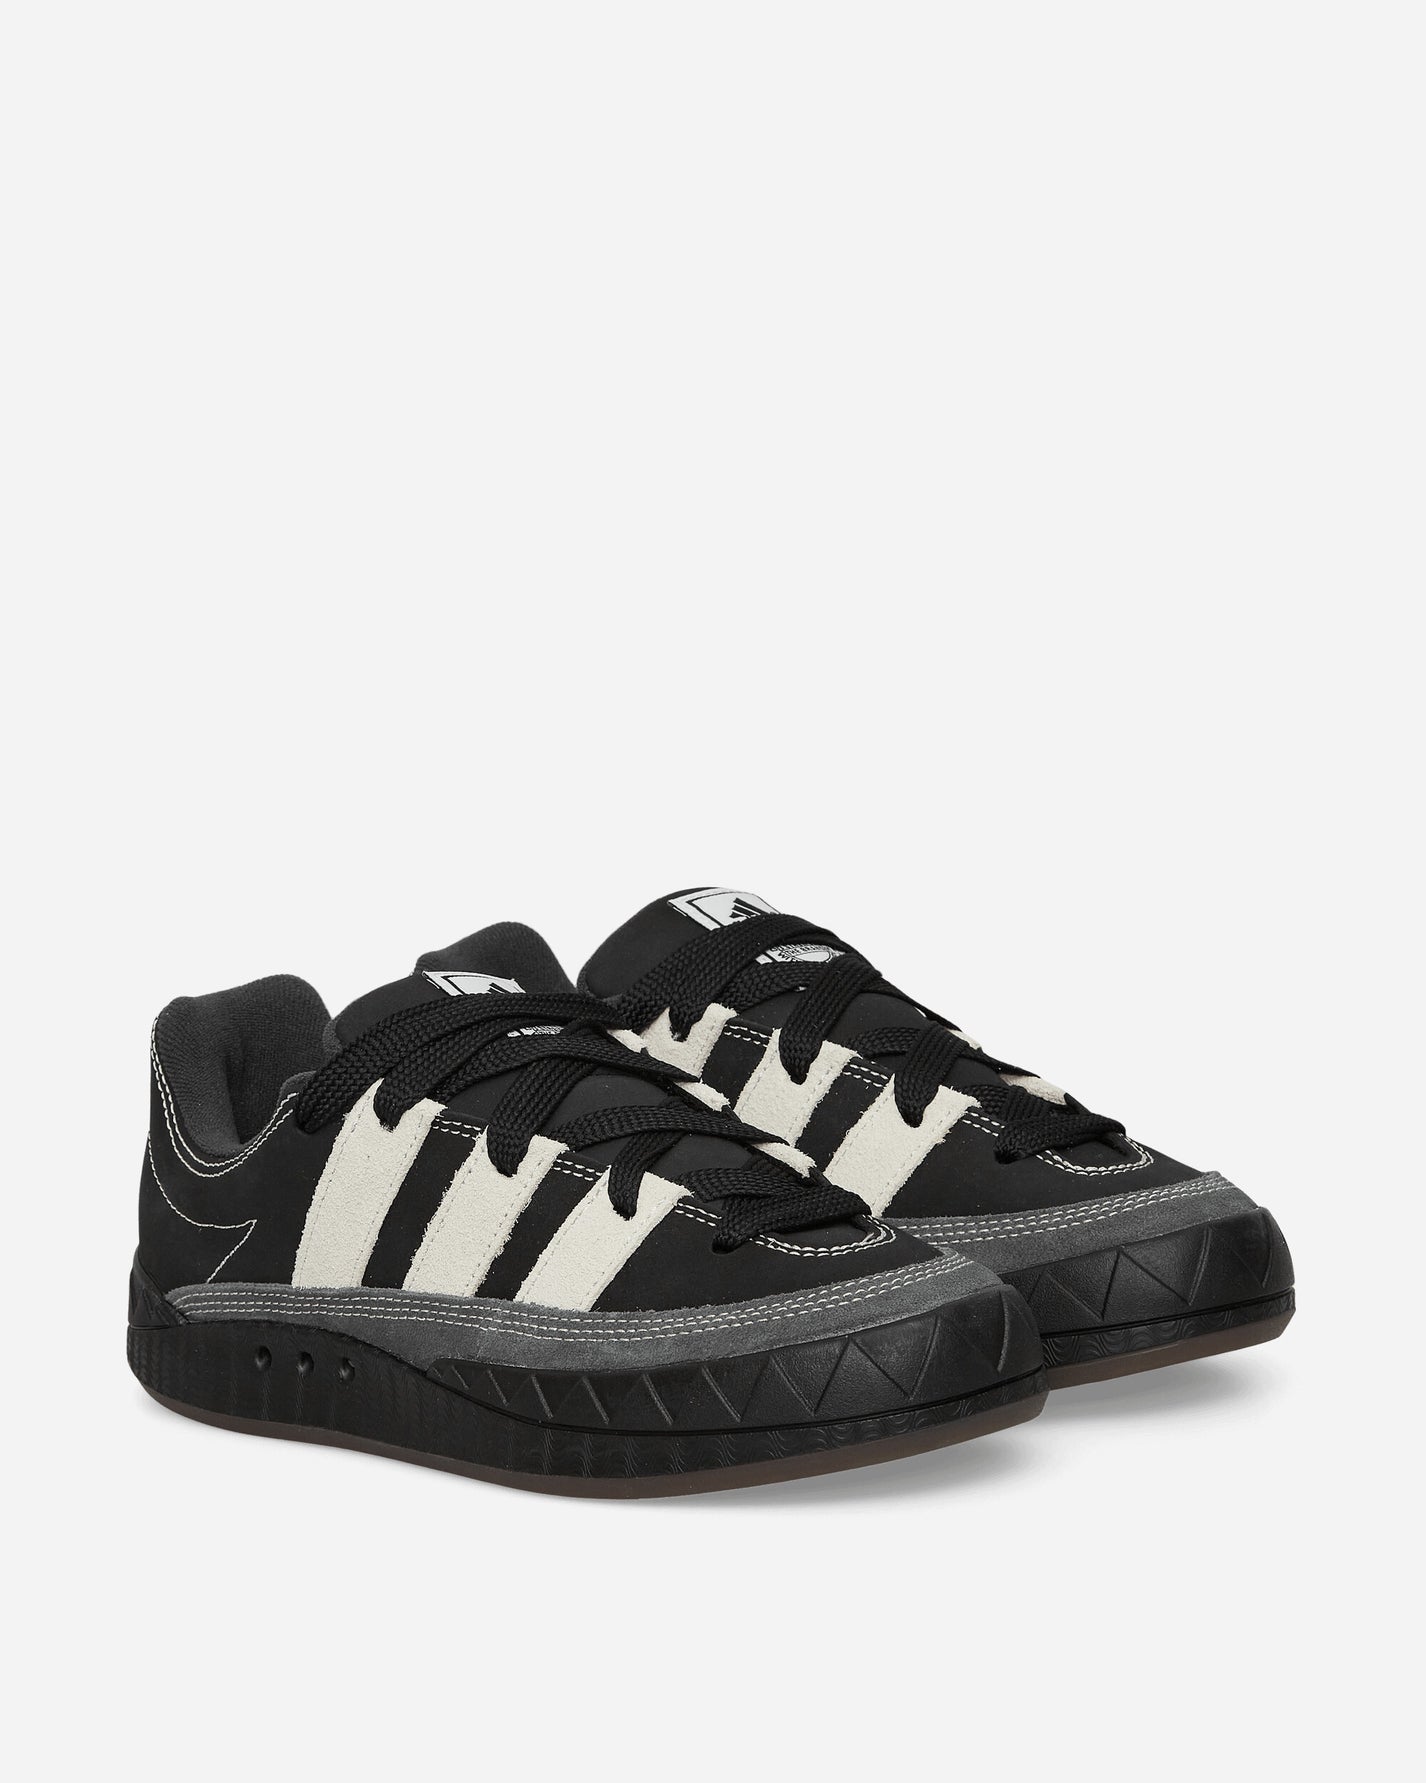 adidas Adimatic Core Black/Ftwr White/Carbon Sneakers Low ID3938